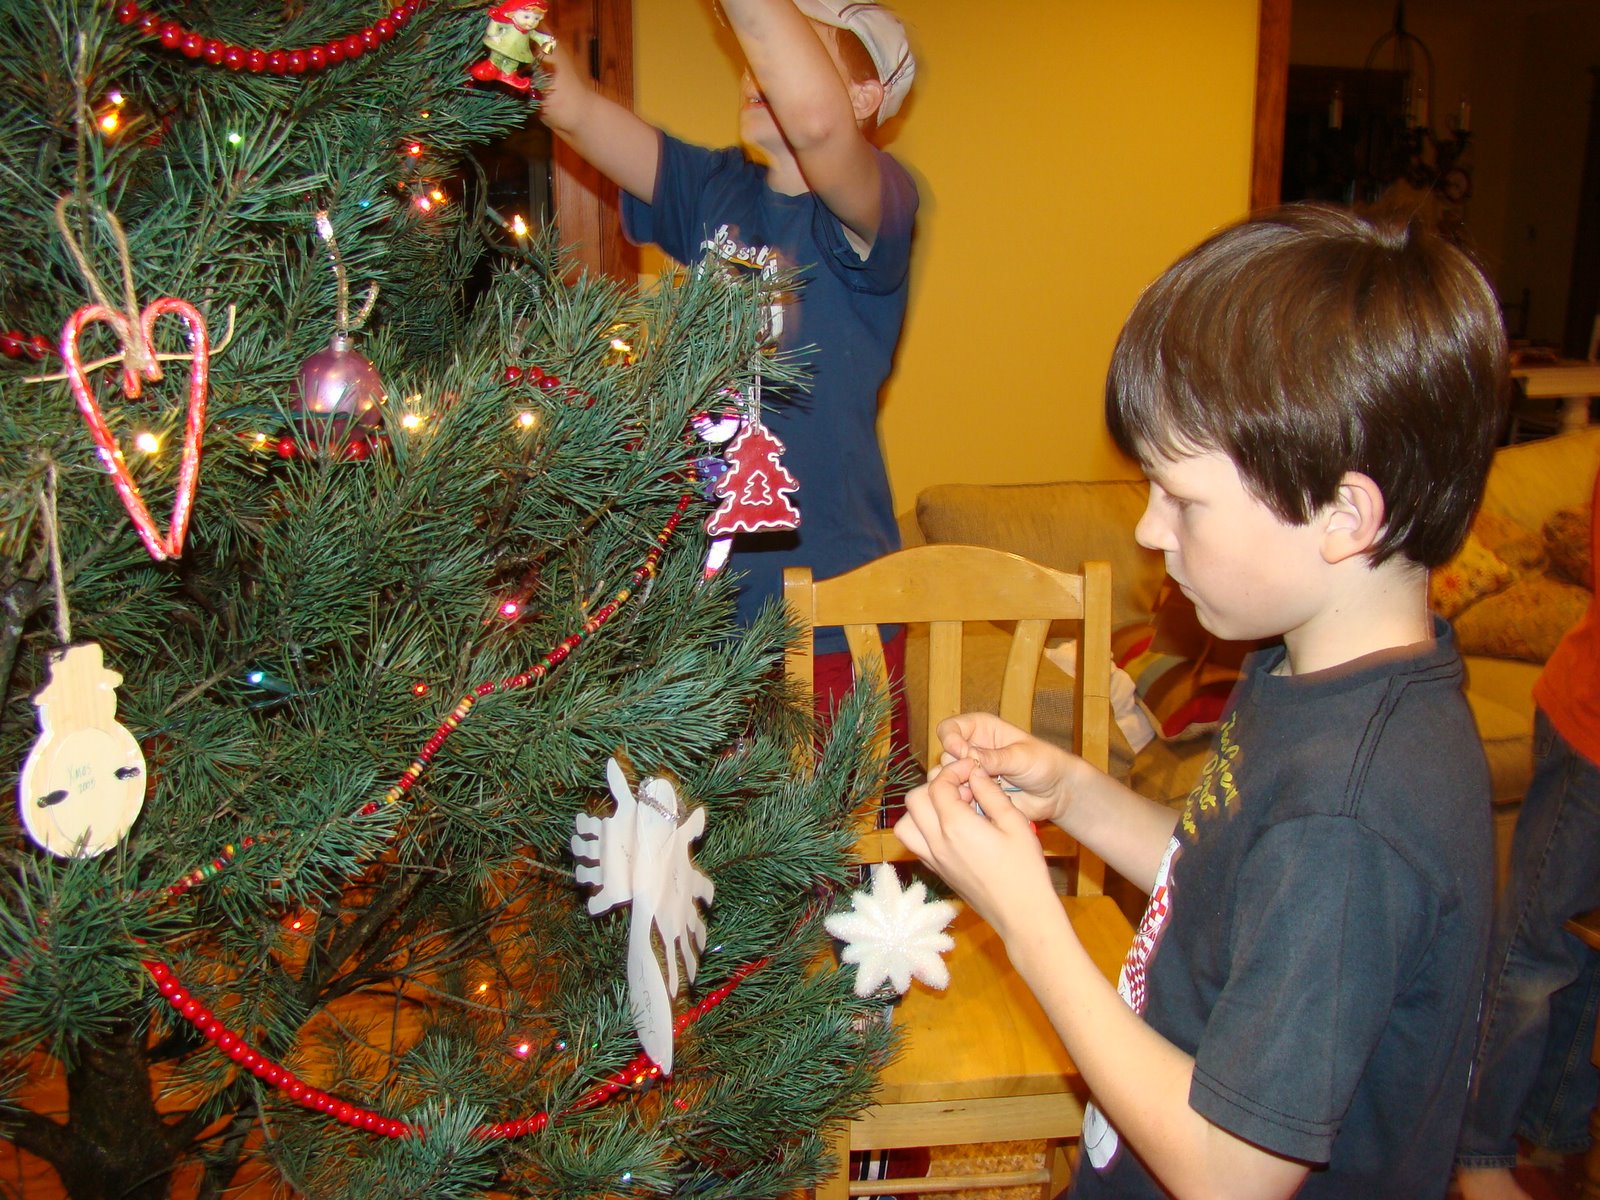 [December+tree,+party,+decorating+cheese+031.jpg]